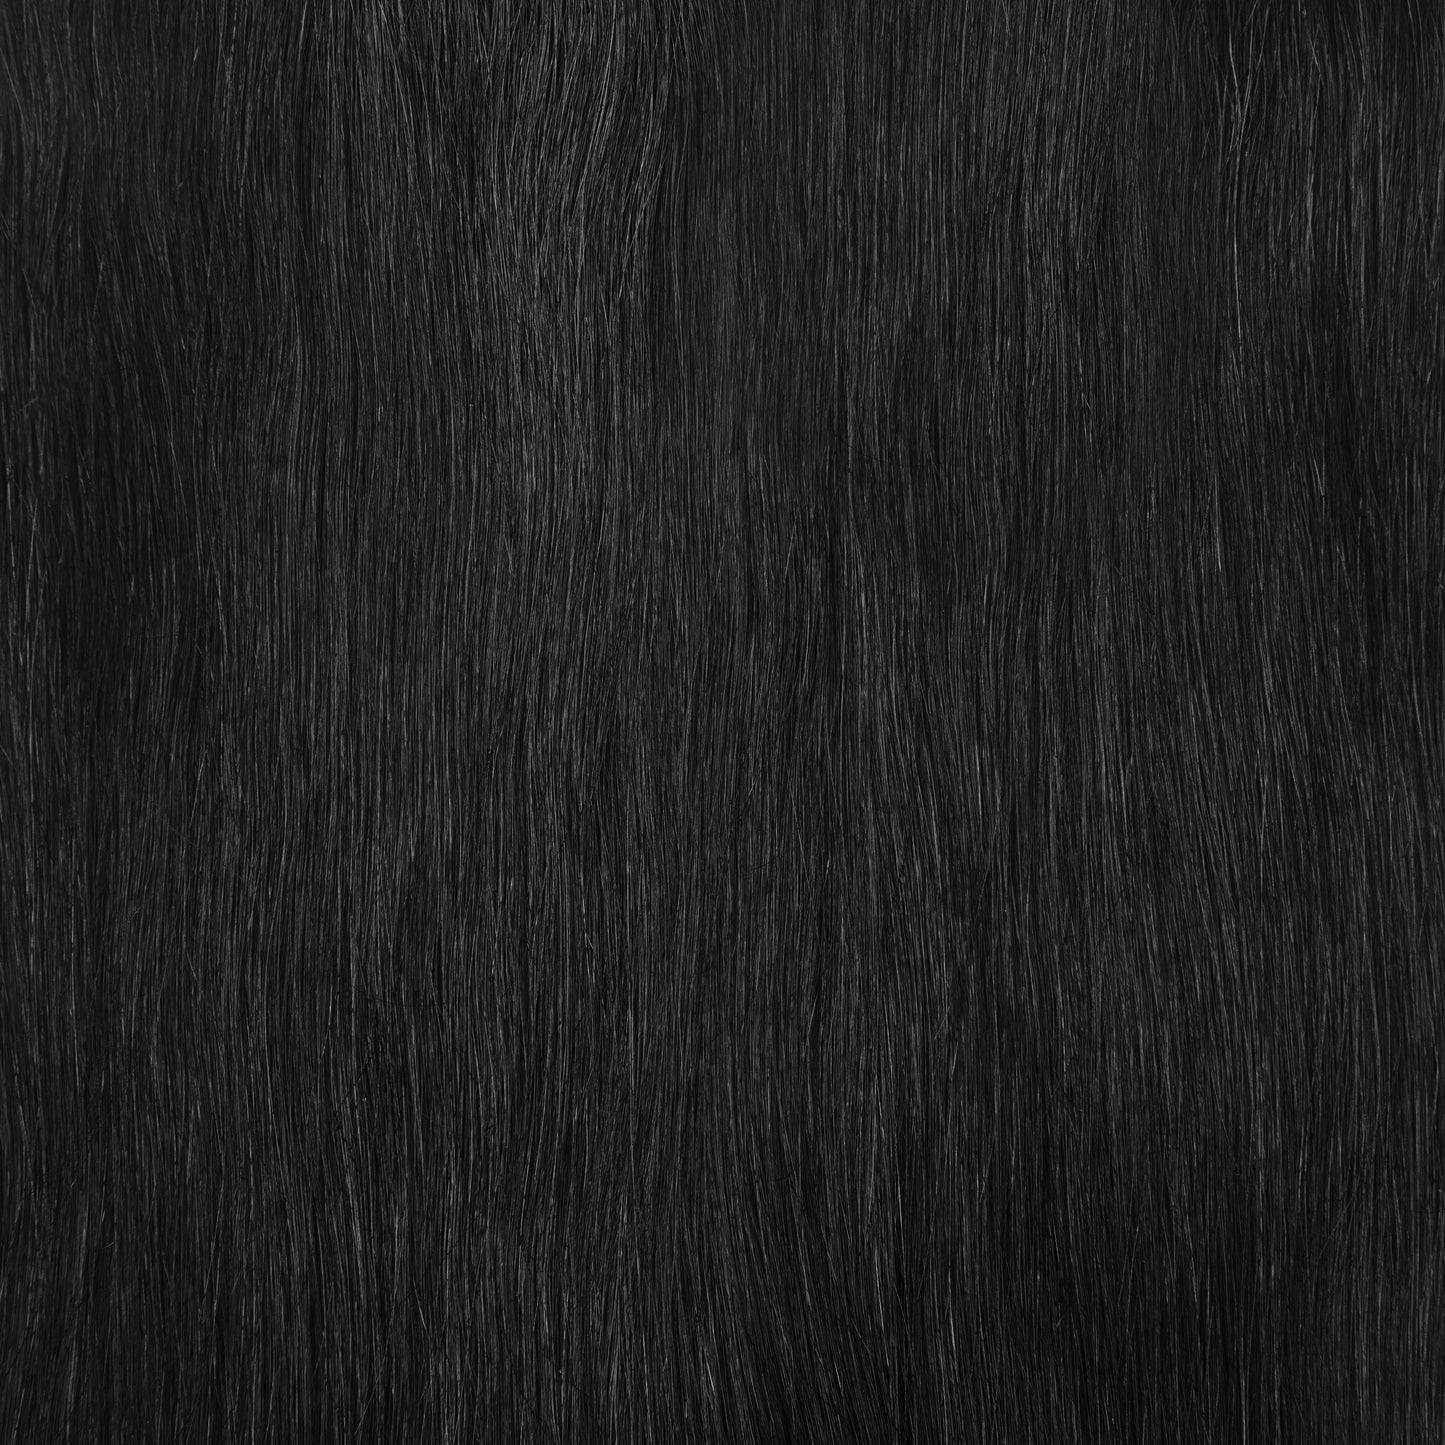 16" Clip-In Natural Black Hair Extension